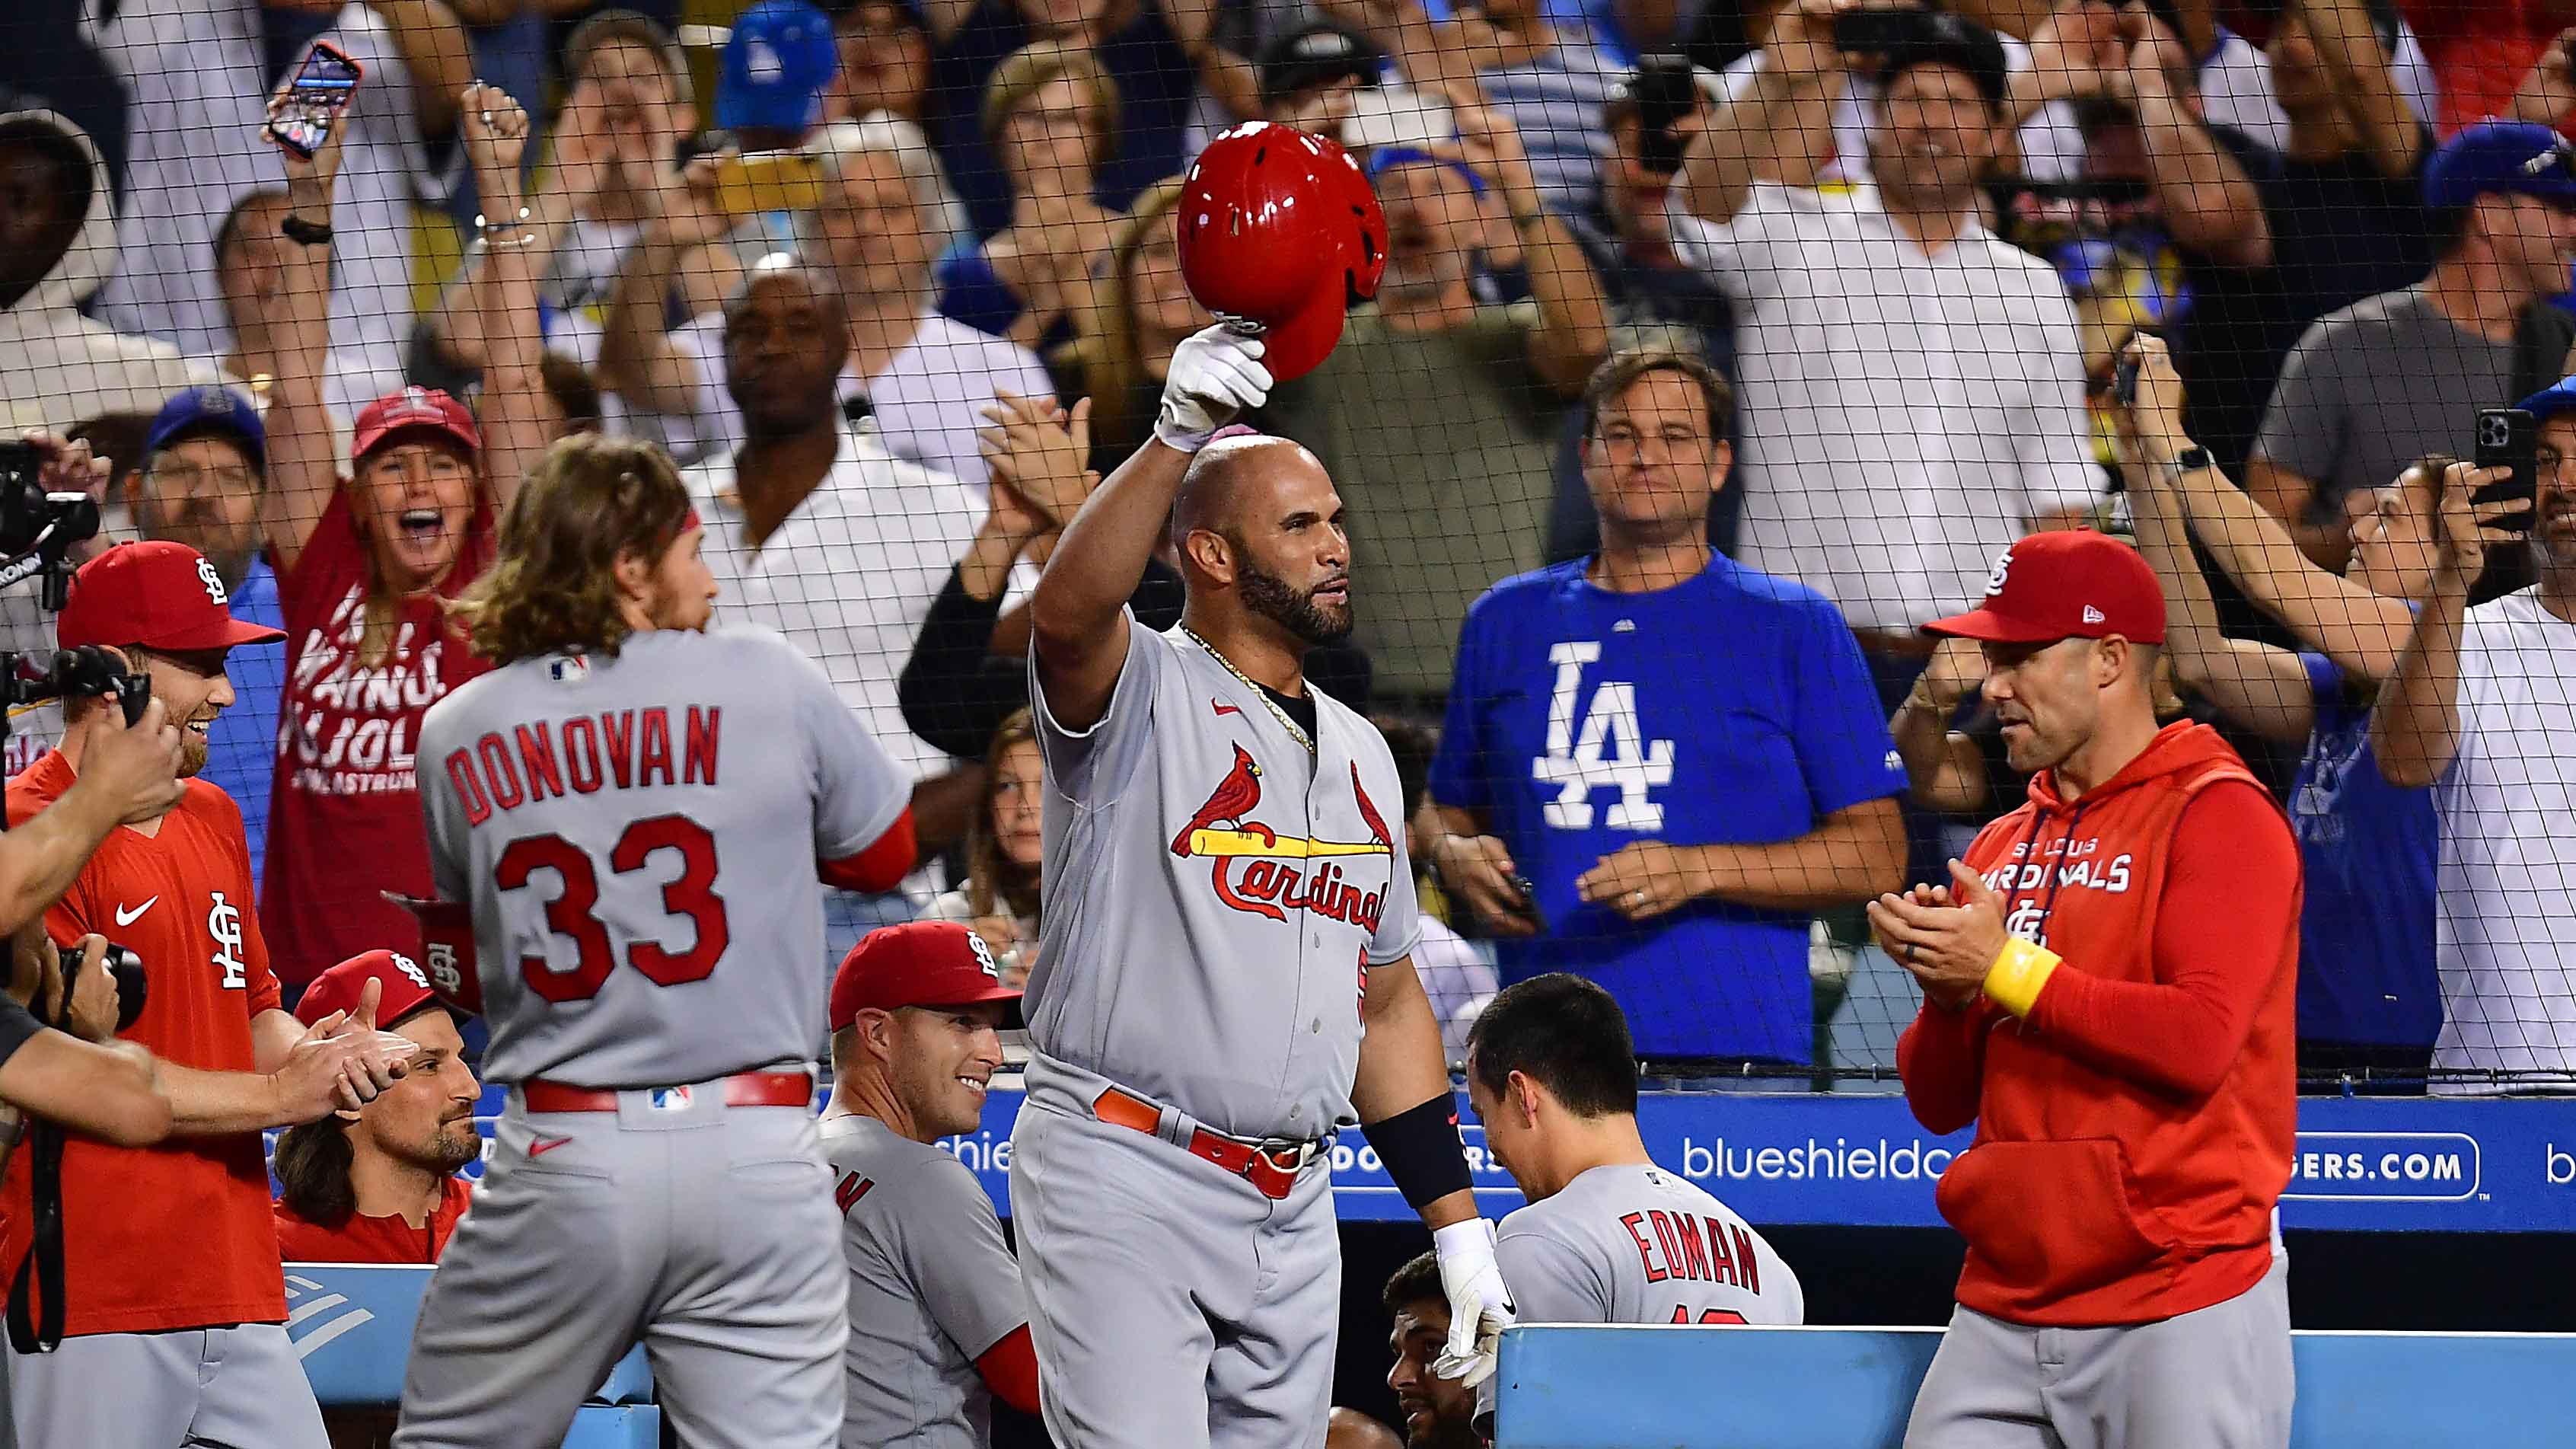 Fans cheer Pujols on as he inches closer to 700 homeruns